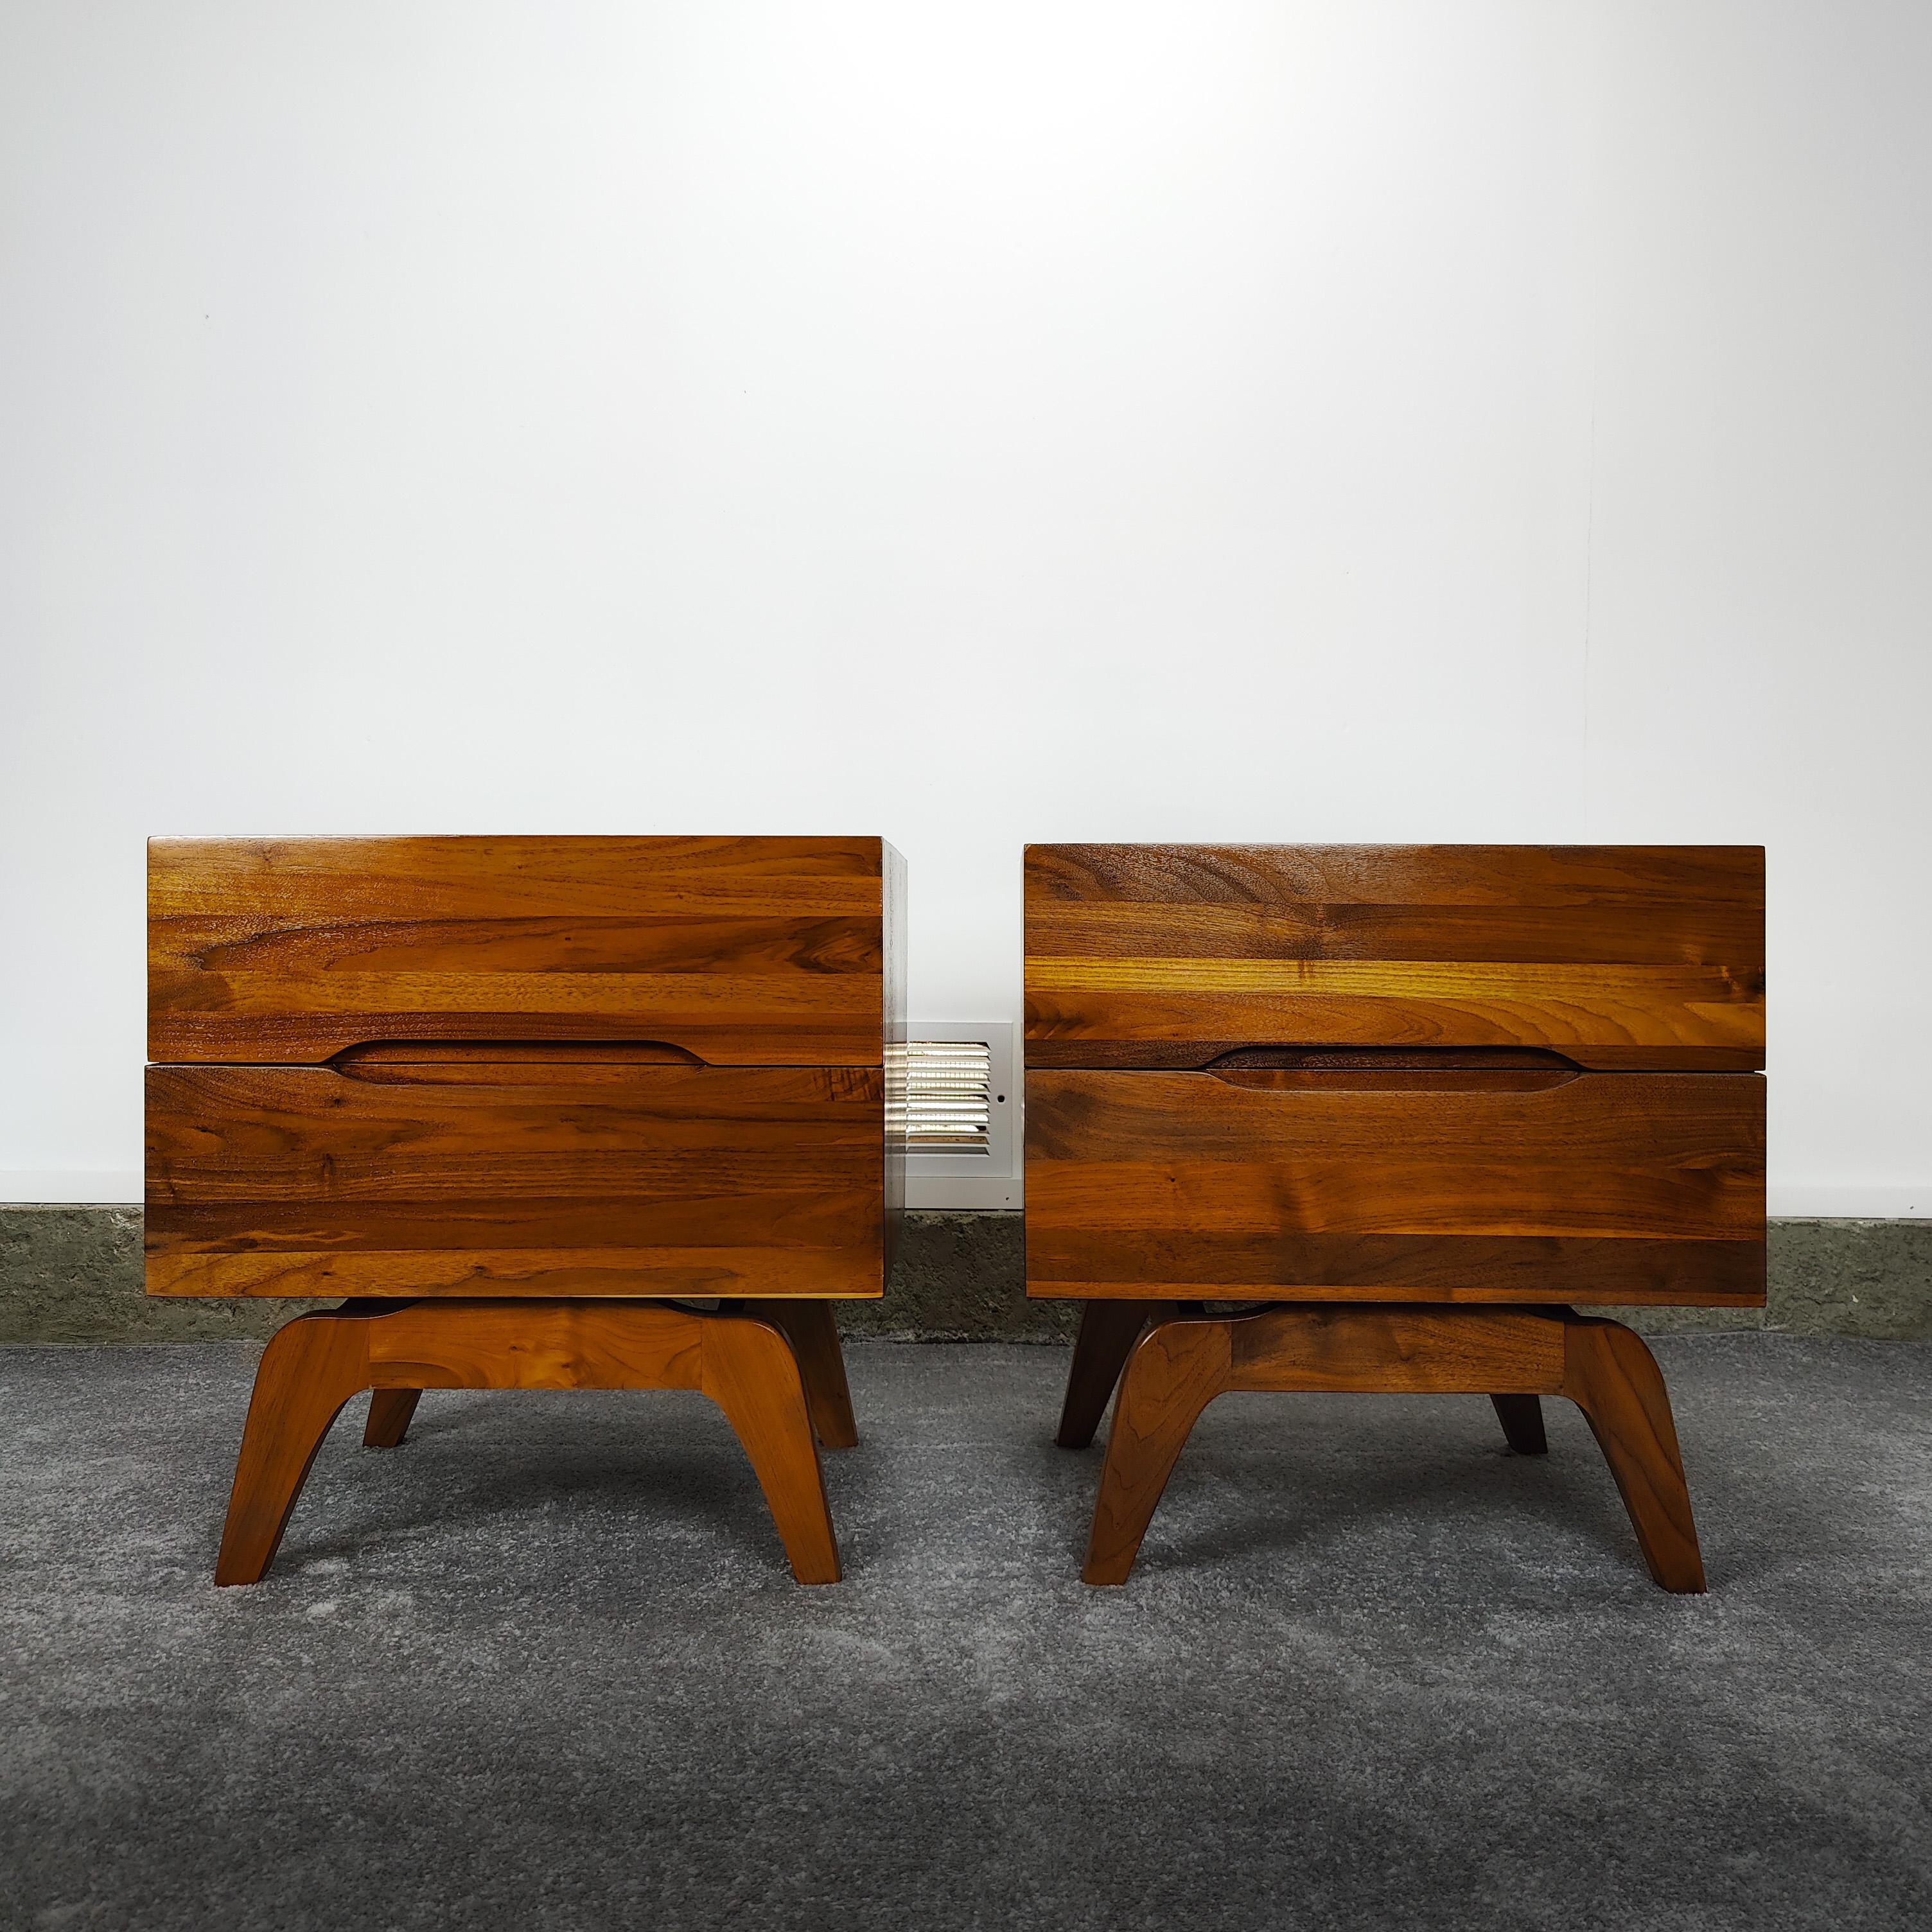 Immerse yourself in the nostalgic charm of the 1960s with this exquisite pair of vintage mid-century modern nightstands. Crafted with an undeniable attention to detail, these pieces are a genuine reflection of the era's iconic design